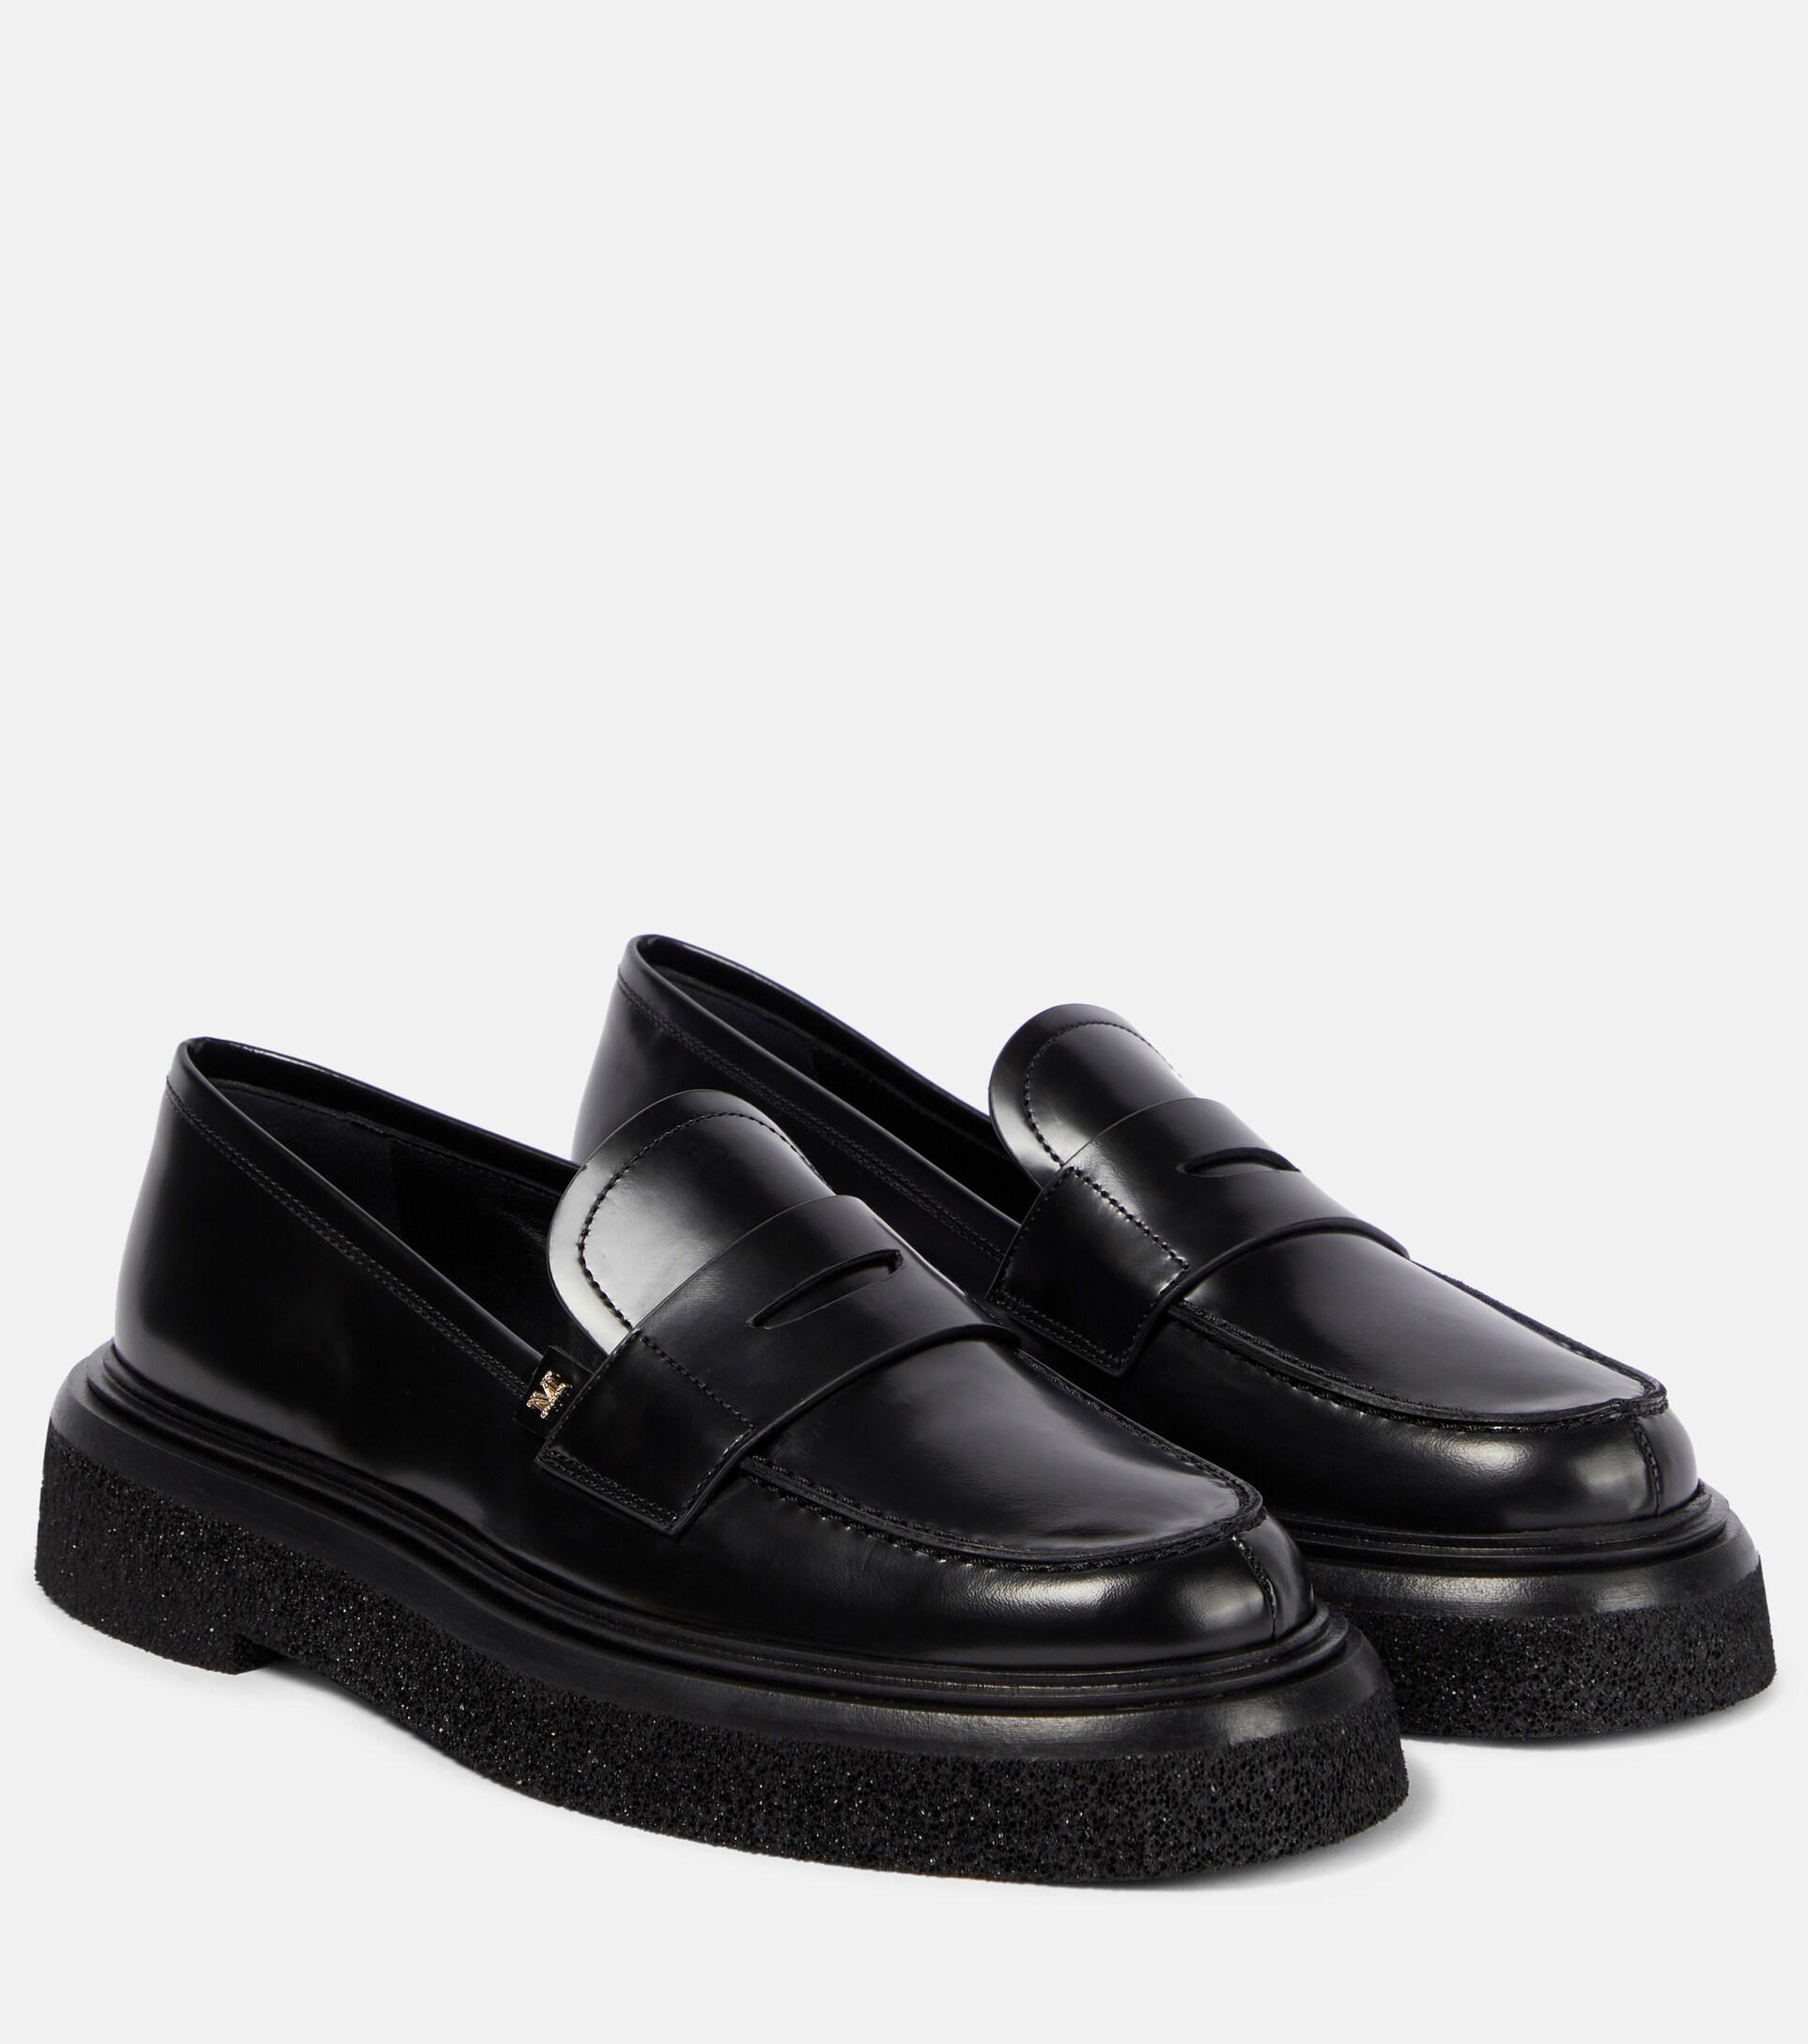 Max Mara Crepeloafer Leather Loafers in Black | Lyst